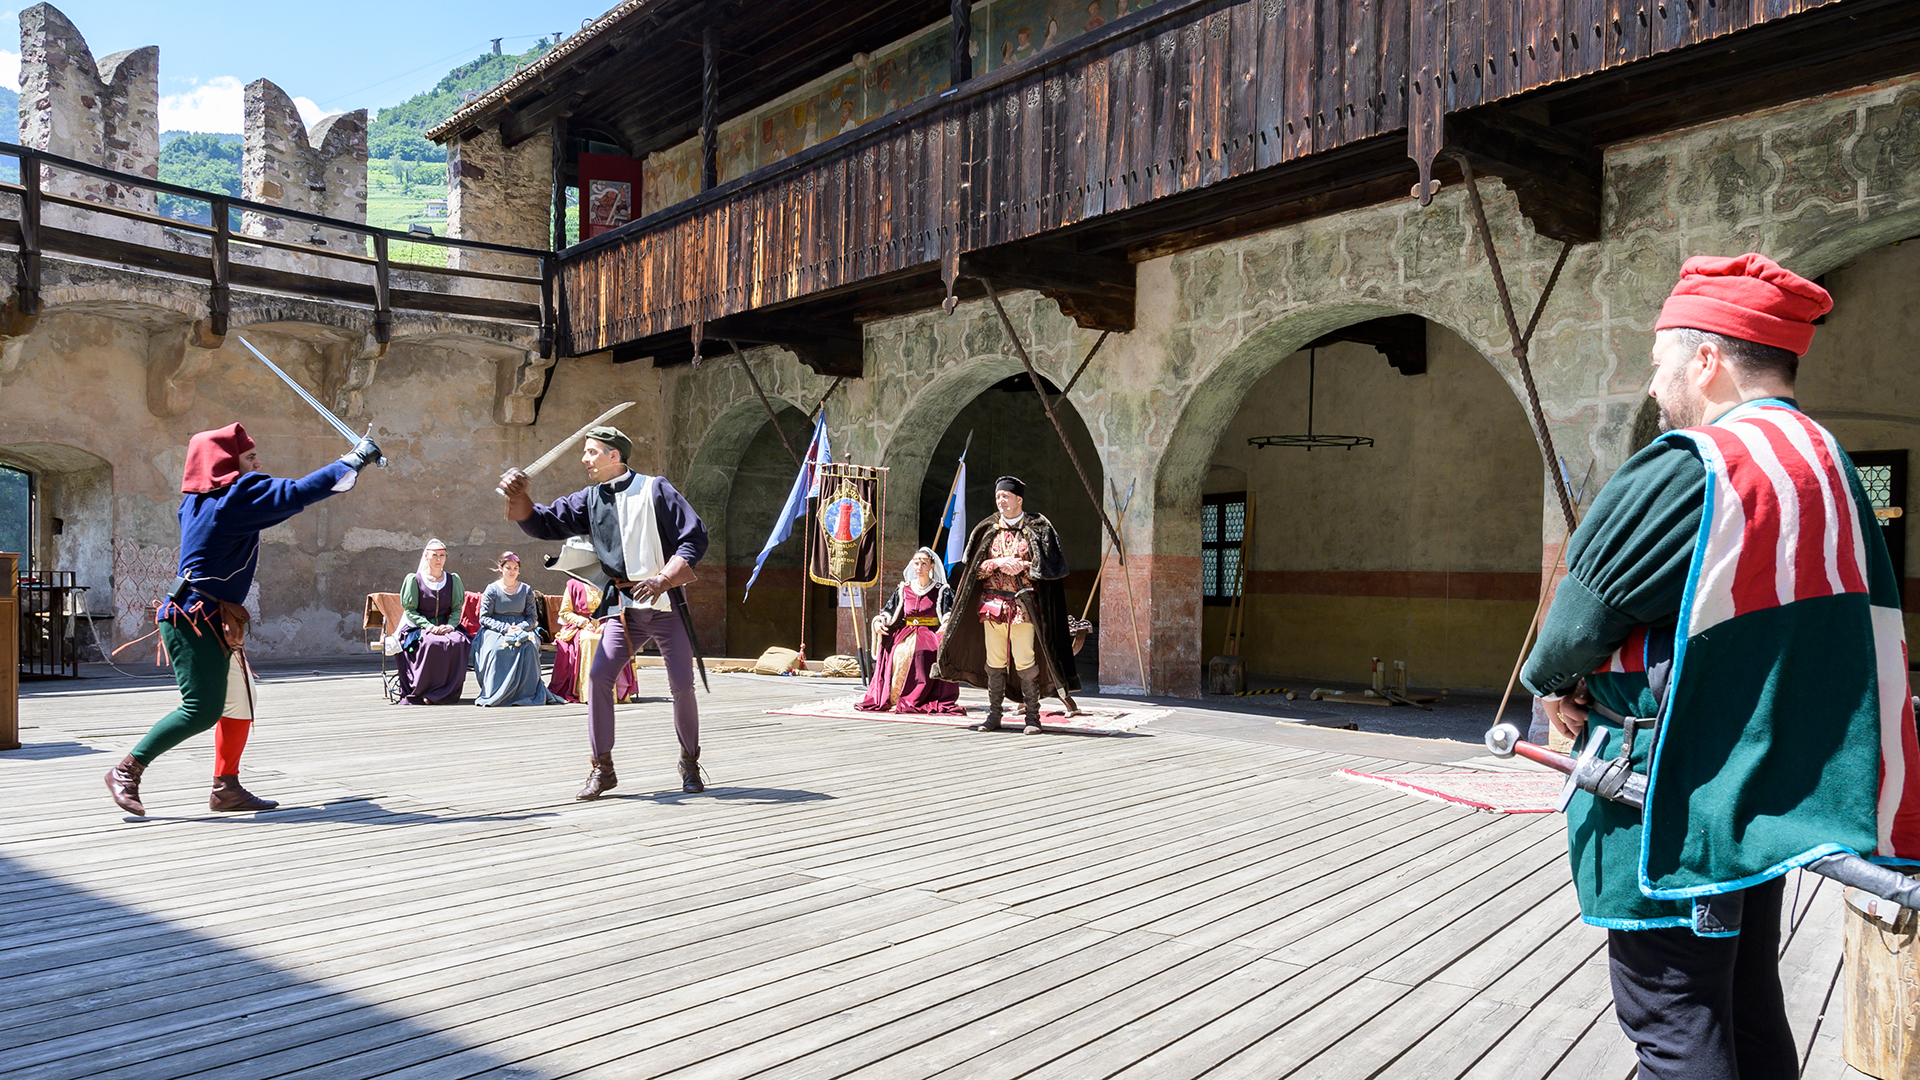 In an open-air performance, in which two actors dressed in traditional costumes perform a duel, visitors can learn more about the history and culture of Bolzano. 